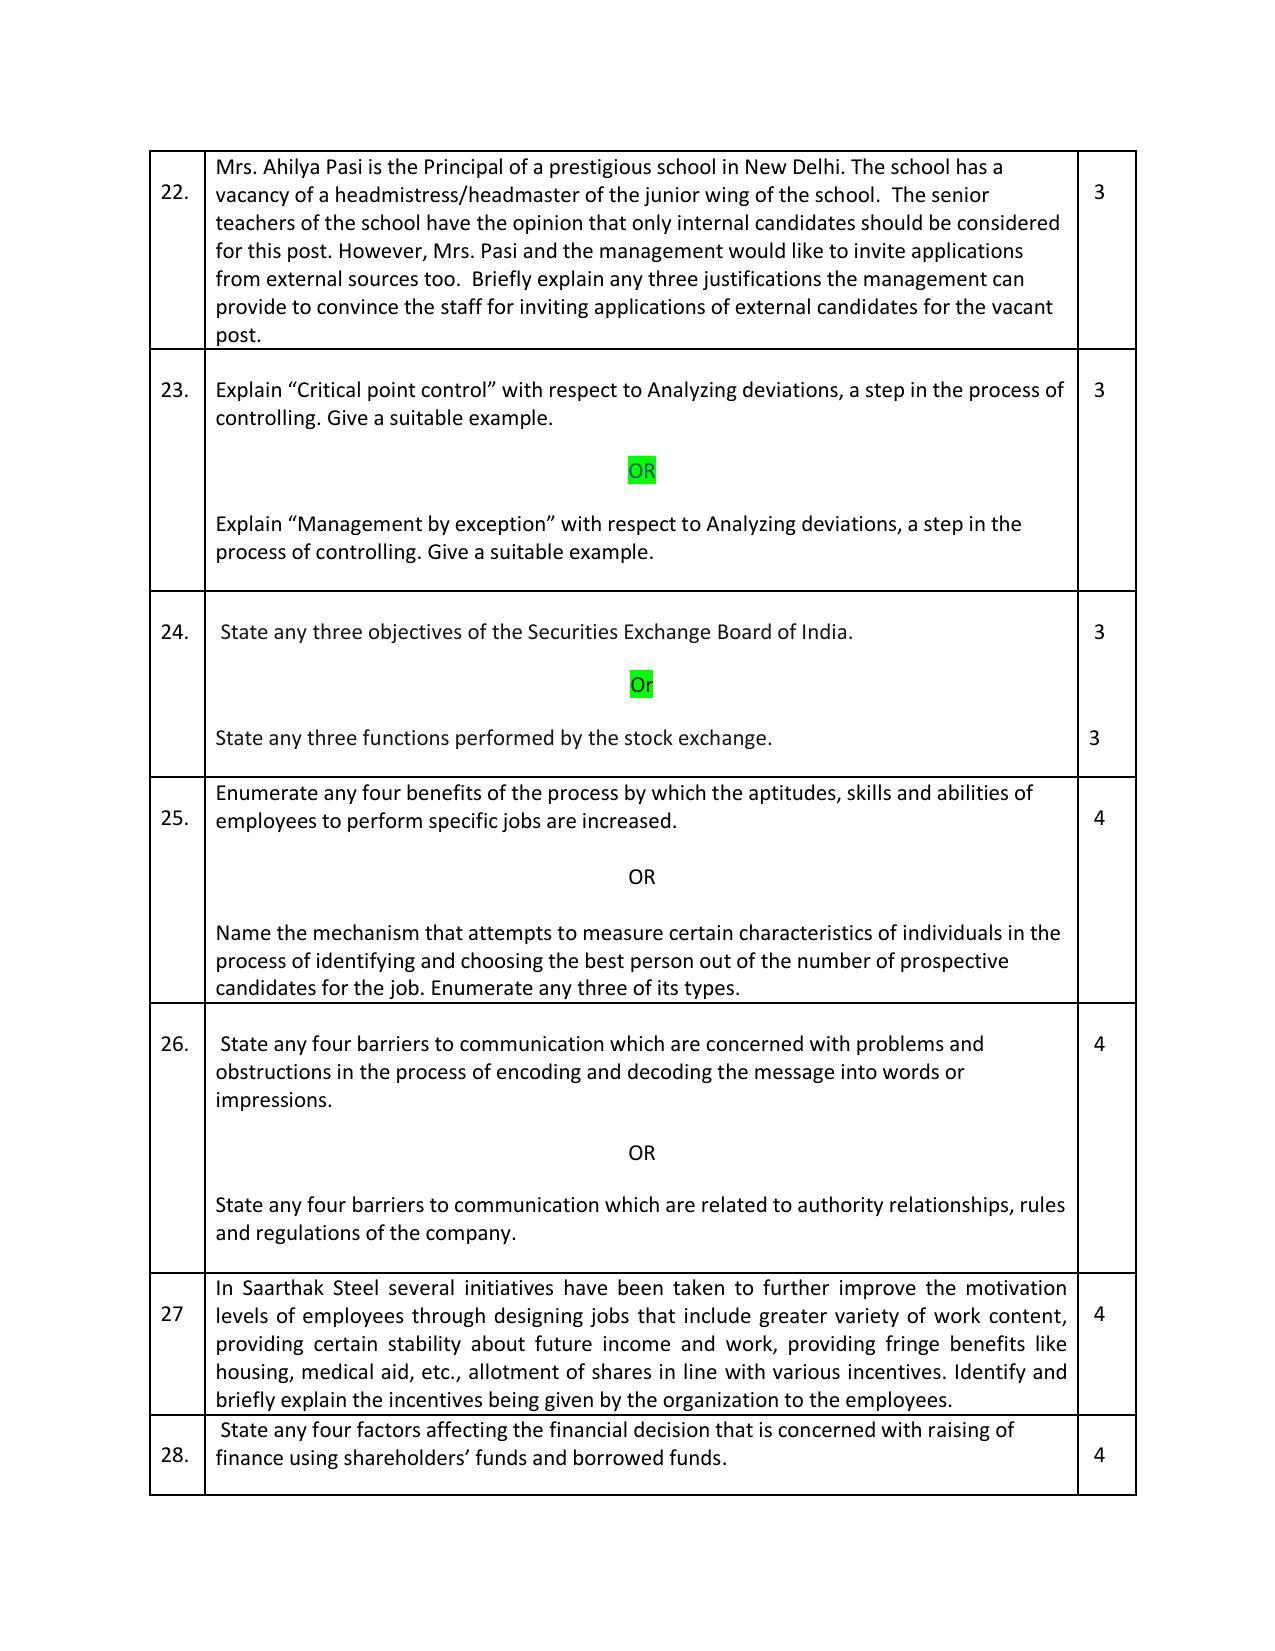 CBSE Class 12 Business Studies Sample Paper 2023 - Page 6